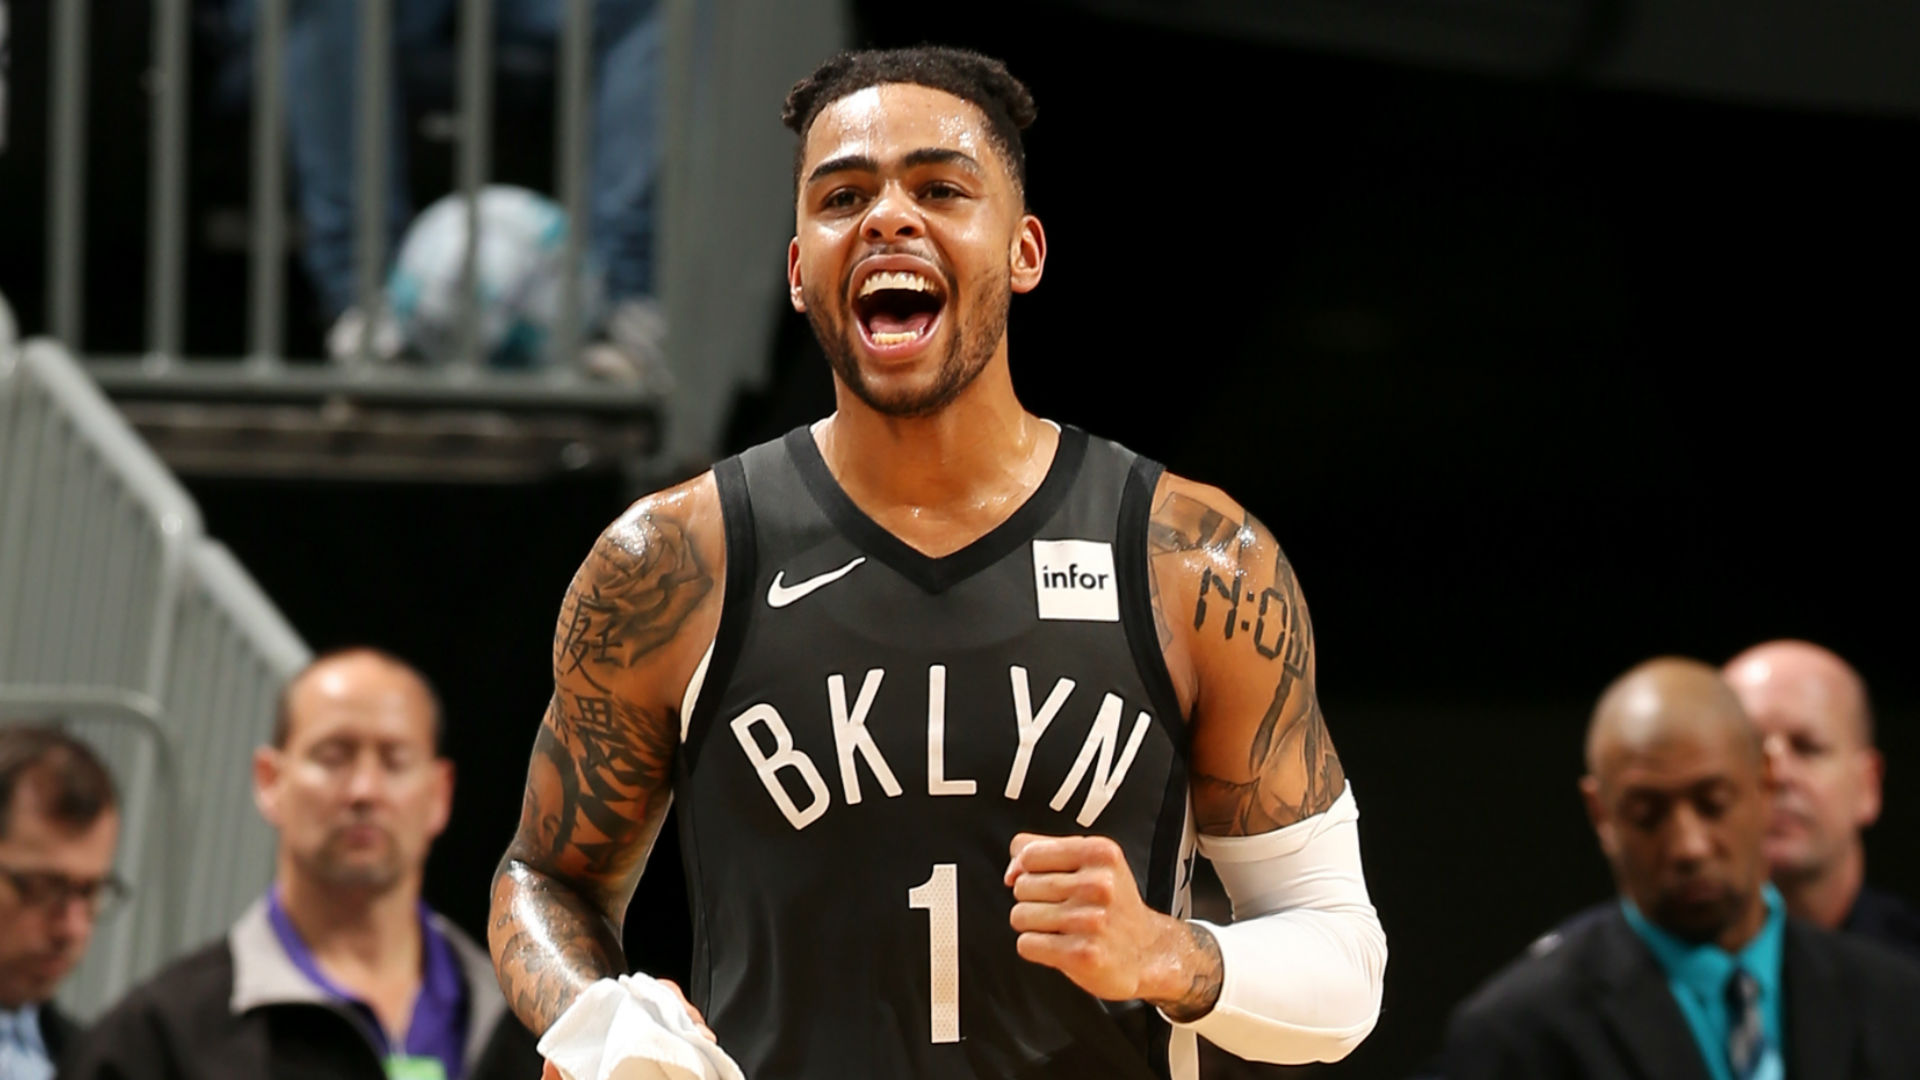 NBA scores and highlights: D'Angelo Russell scores 40 points as Nets edge Hornets ...1920 x 1080